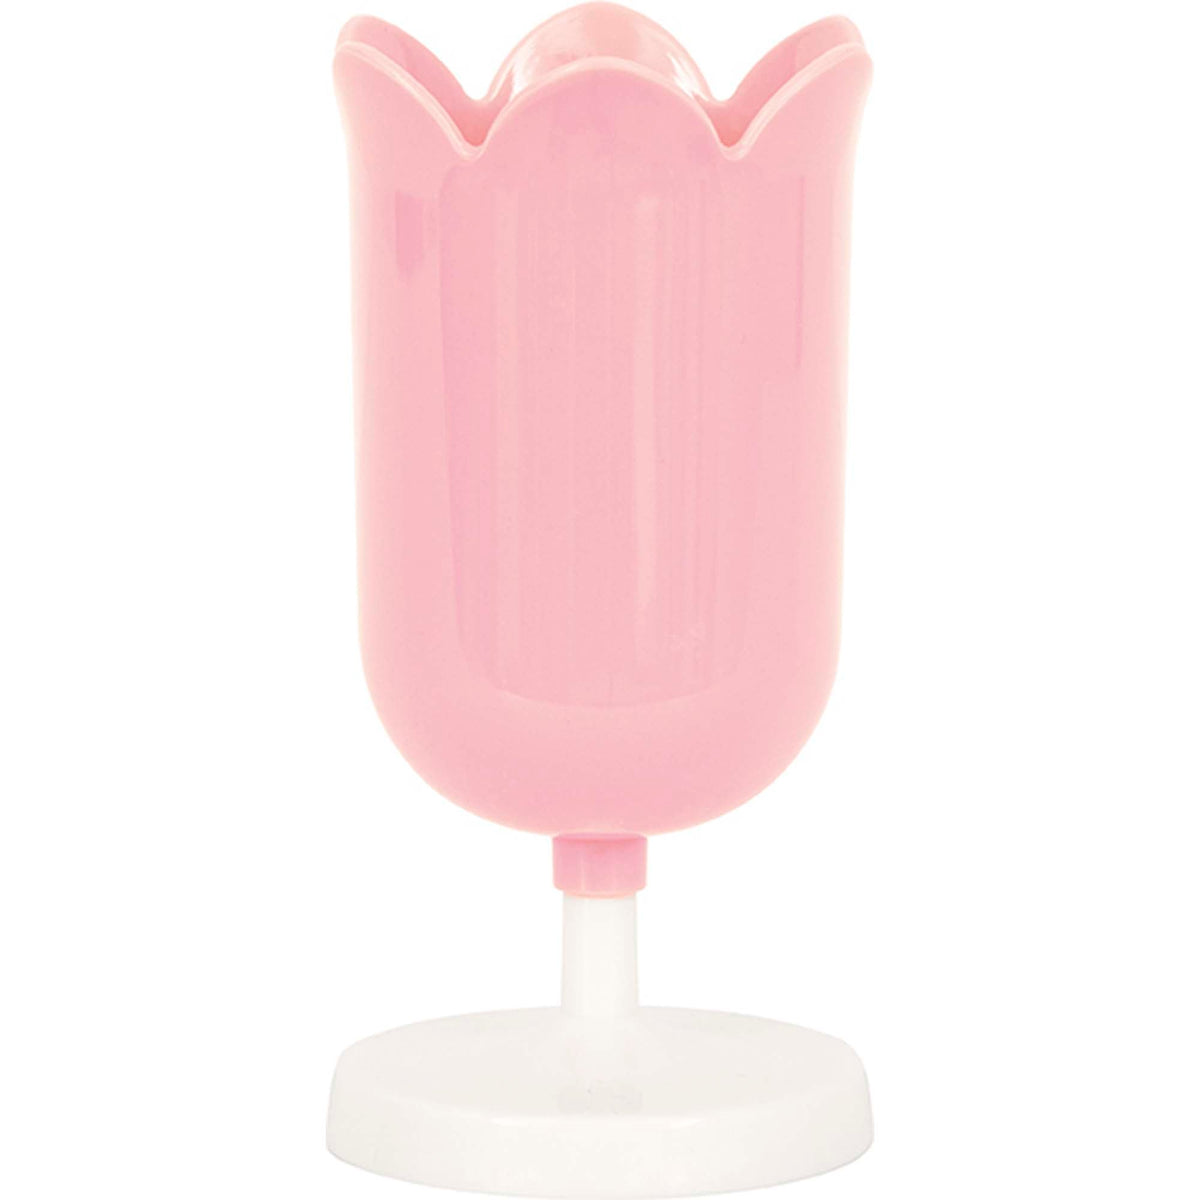 UNIQUE PARTY FAVORS Easter Dainty Easter Plastic Flower Cup, Pink, 5 Oz, 1 Count 011179517961